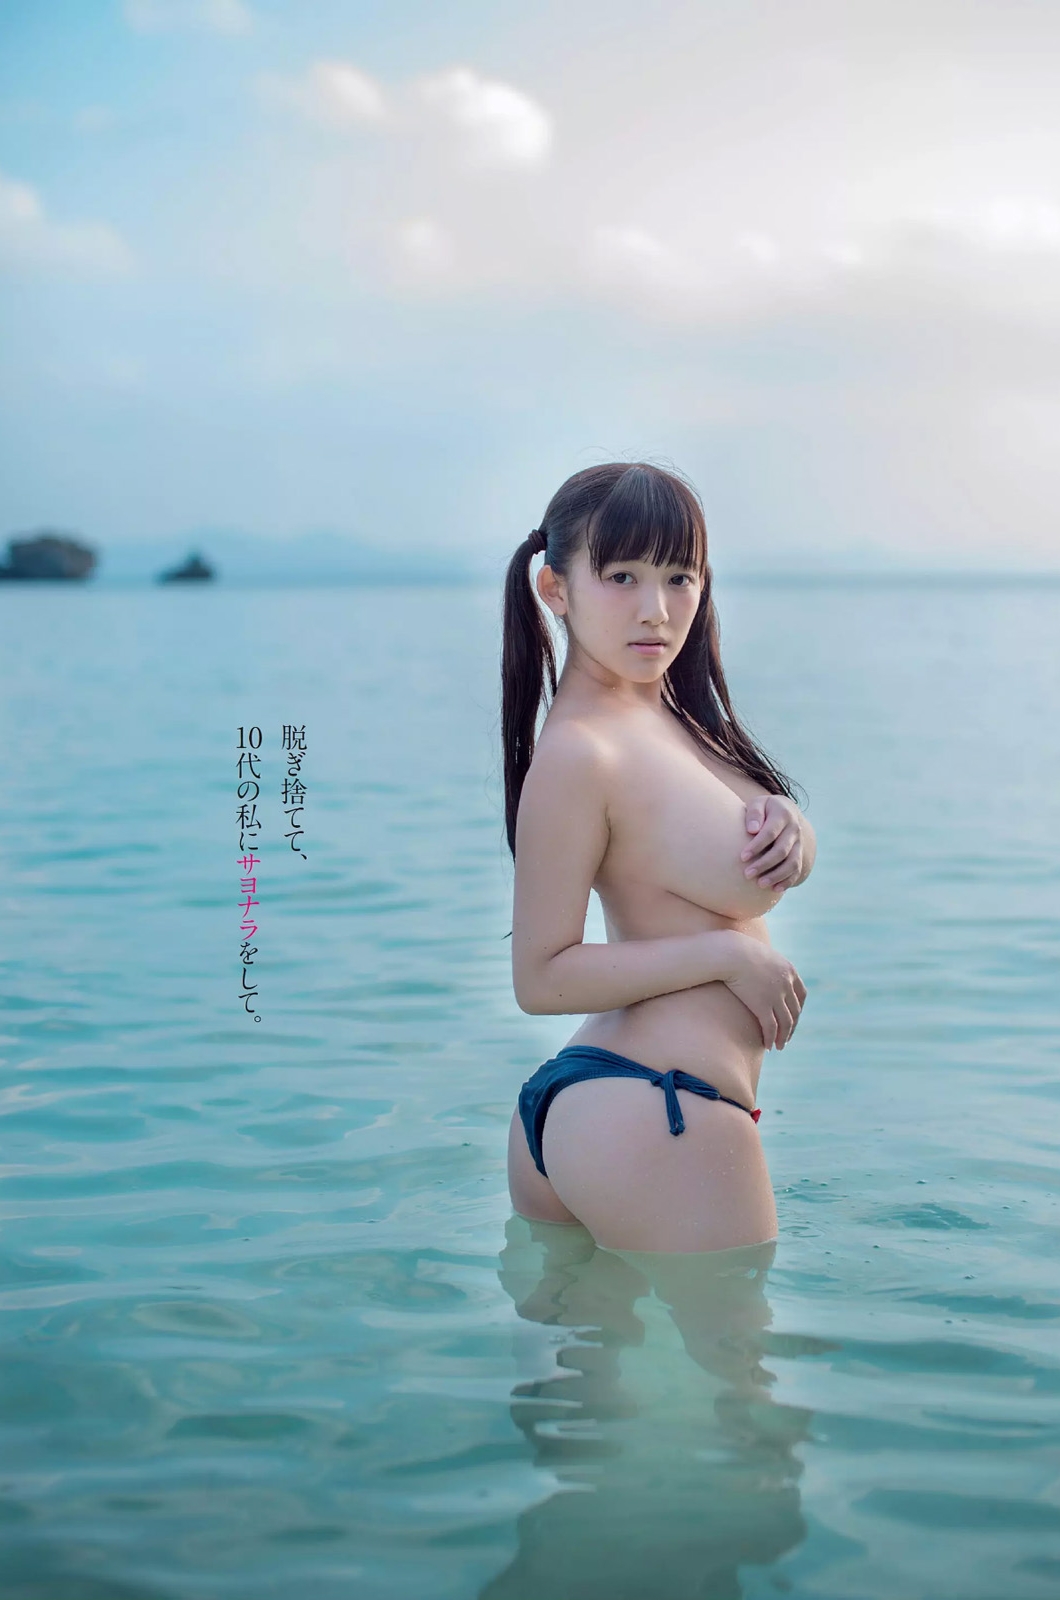 Jun Amaki Plump Cute Lovely Picture and Photo